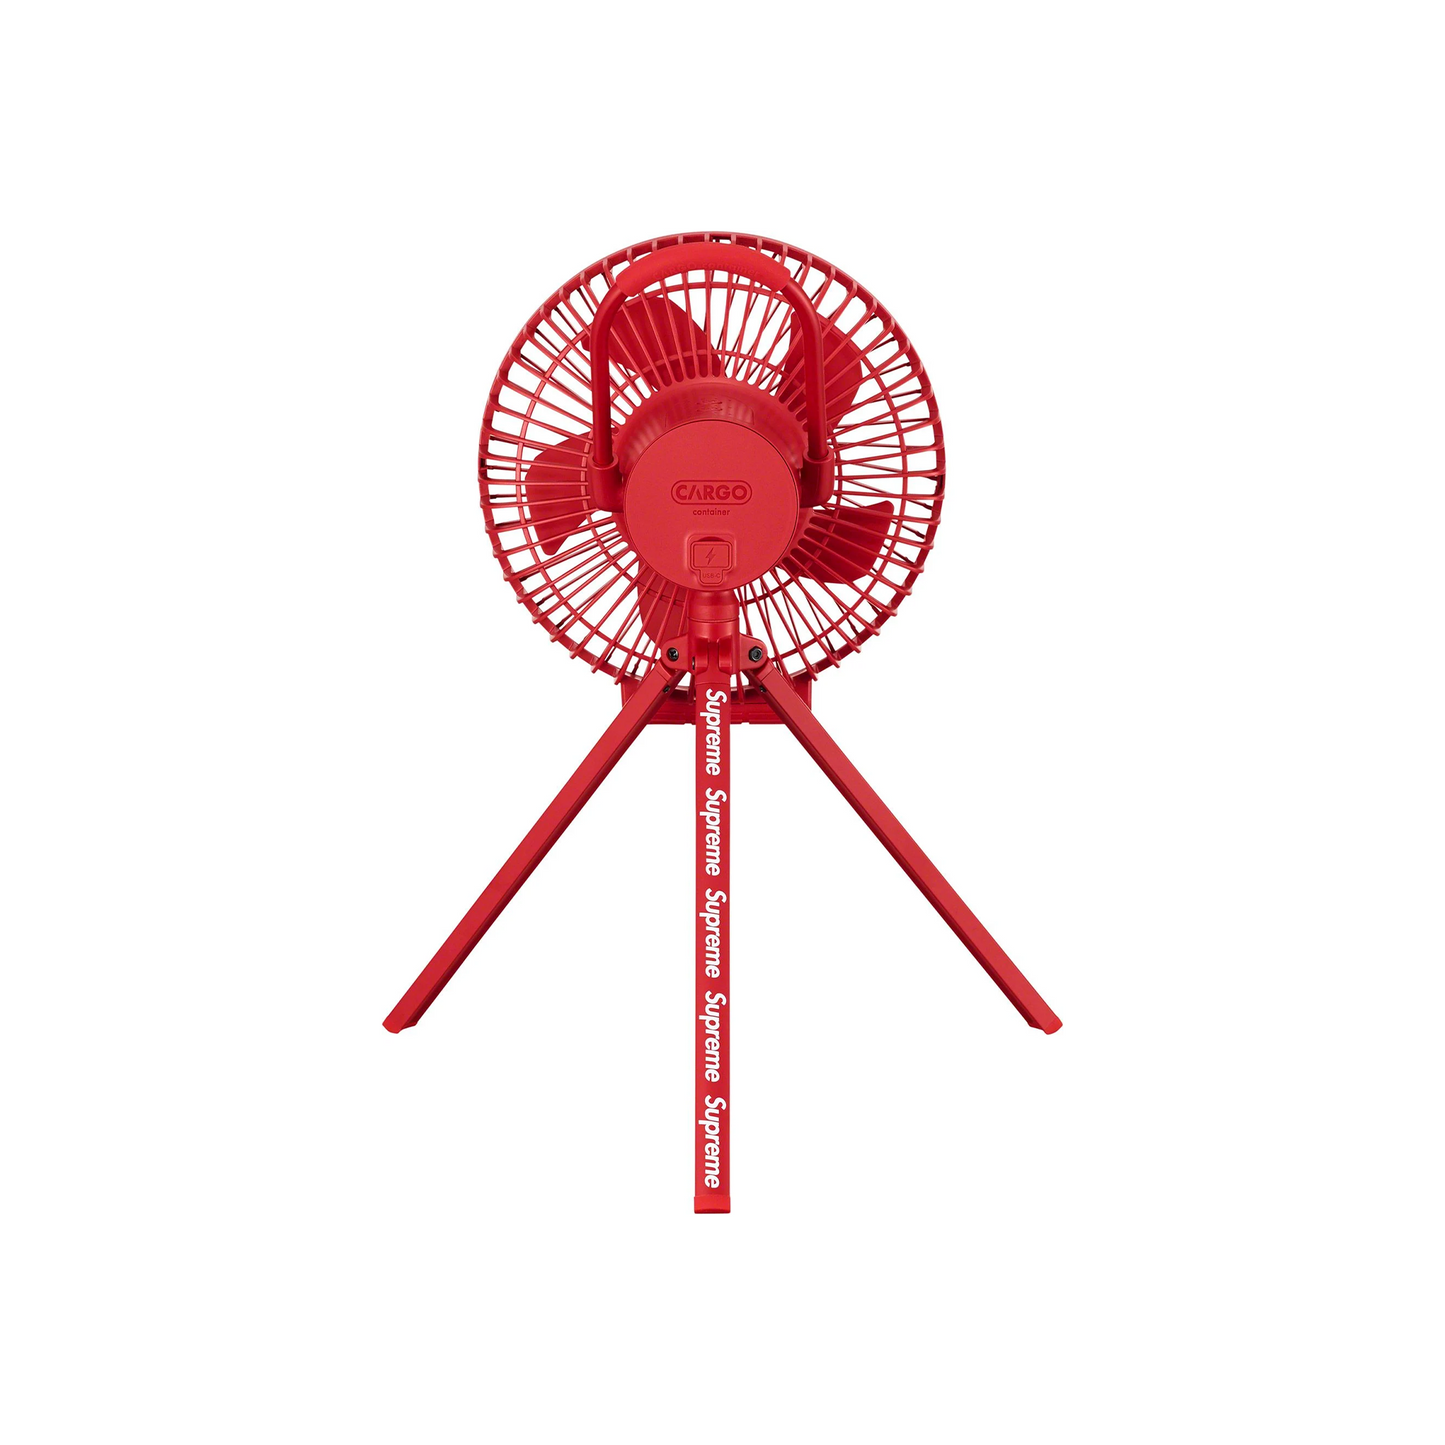 Supreme Cargo Container Electric Fan (FW23)